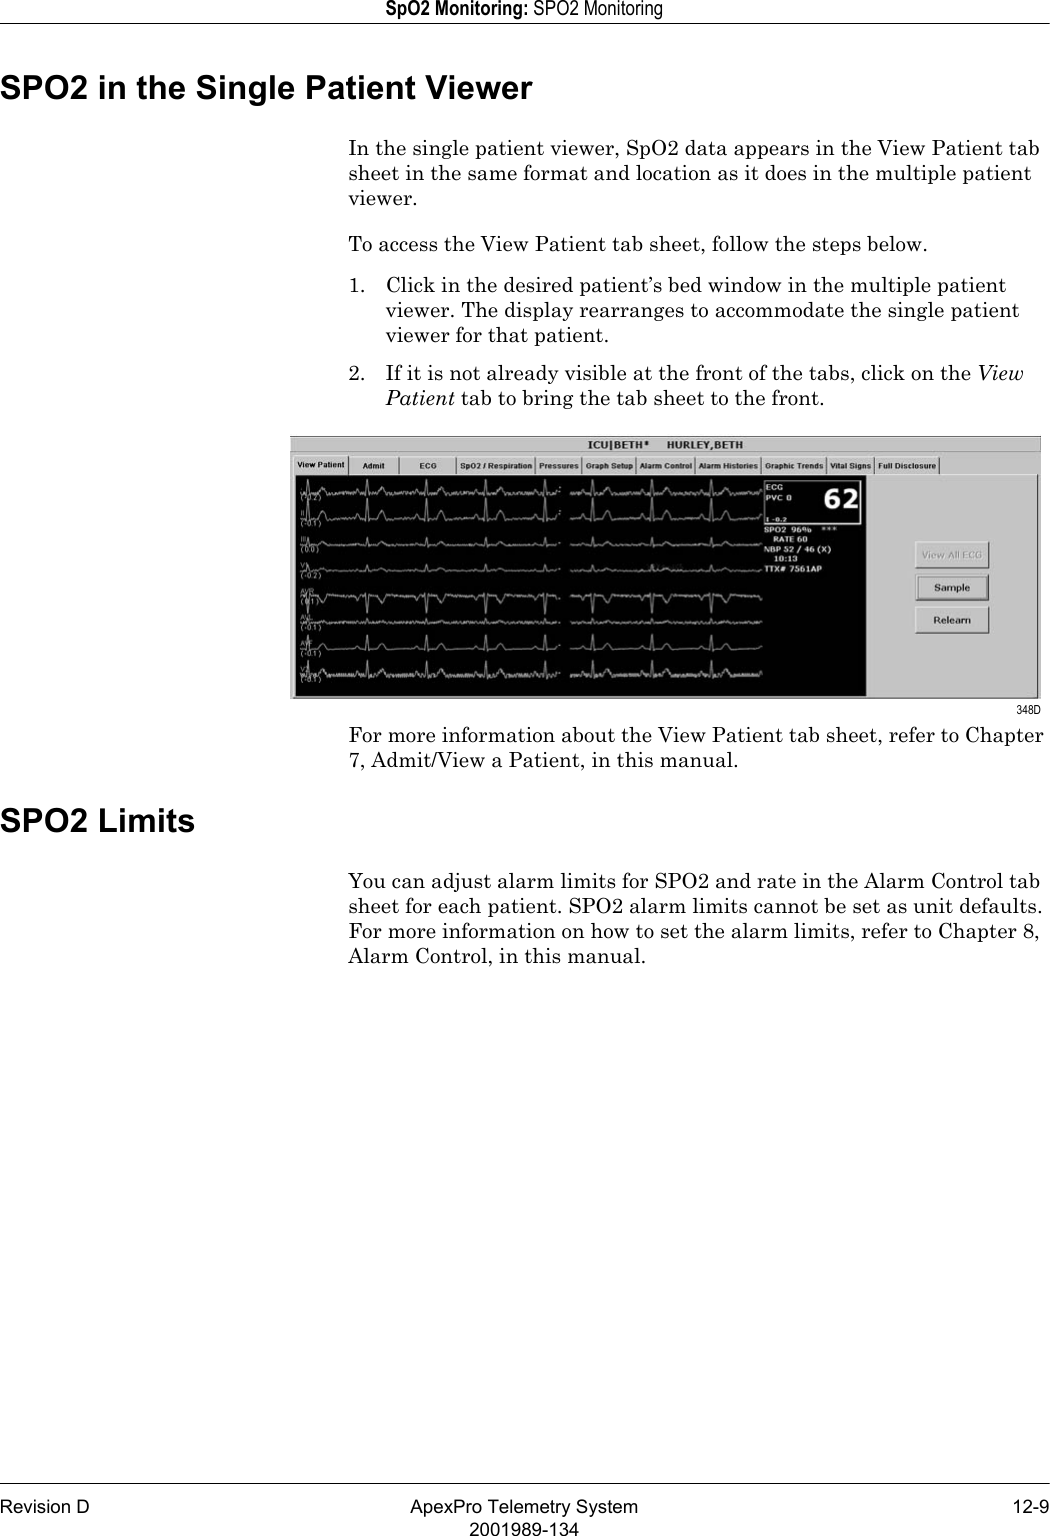 Revision D ApexPro Telemetry System 12-92001989-134SpO2 Monitoring: SPO2 MonitoringSPO2 in the Single Patient ViewerIn the single patient viewer, SpO2 data appears in the View Patient tab sheet in the same format and location as it does in the multiple patient viewer.To access the View Patient tab sheet, follow the steps below.1. Click in the desired patient’s bed window in the multiple patient viewer. The display rearranges to accommodate the single patient viewer for that patient.2. If it is not already visible at the front of the tabs, click on the View Patient tab to bring the tab sheet to the front.For more information about the View Patient tab sheet, refer to Chapter 7, Admit/View a Patient, in this manual.SPO2 LimitsYou can adjust alarm limits for SPO2 and rate in the Alarm Control tab sheet for each patient. SPO2 alarm limits cannot be set as unit defaults. For more information on how to set the alarm limits, refer to Chapter 8, Alarm Control, in this manual. 348D